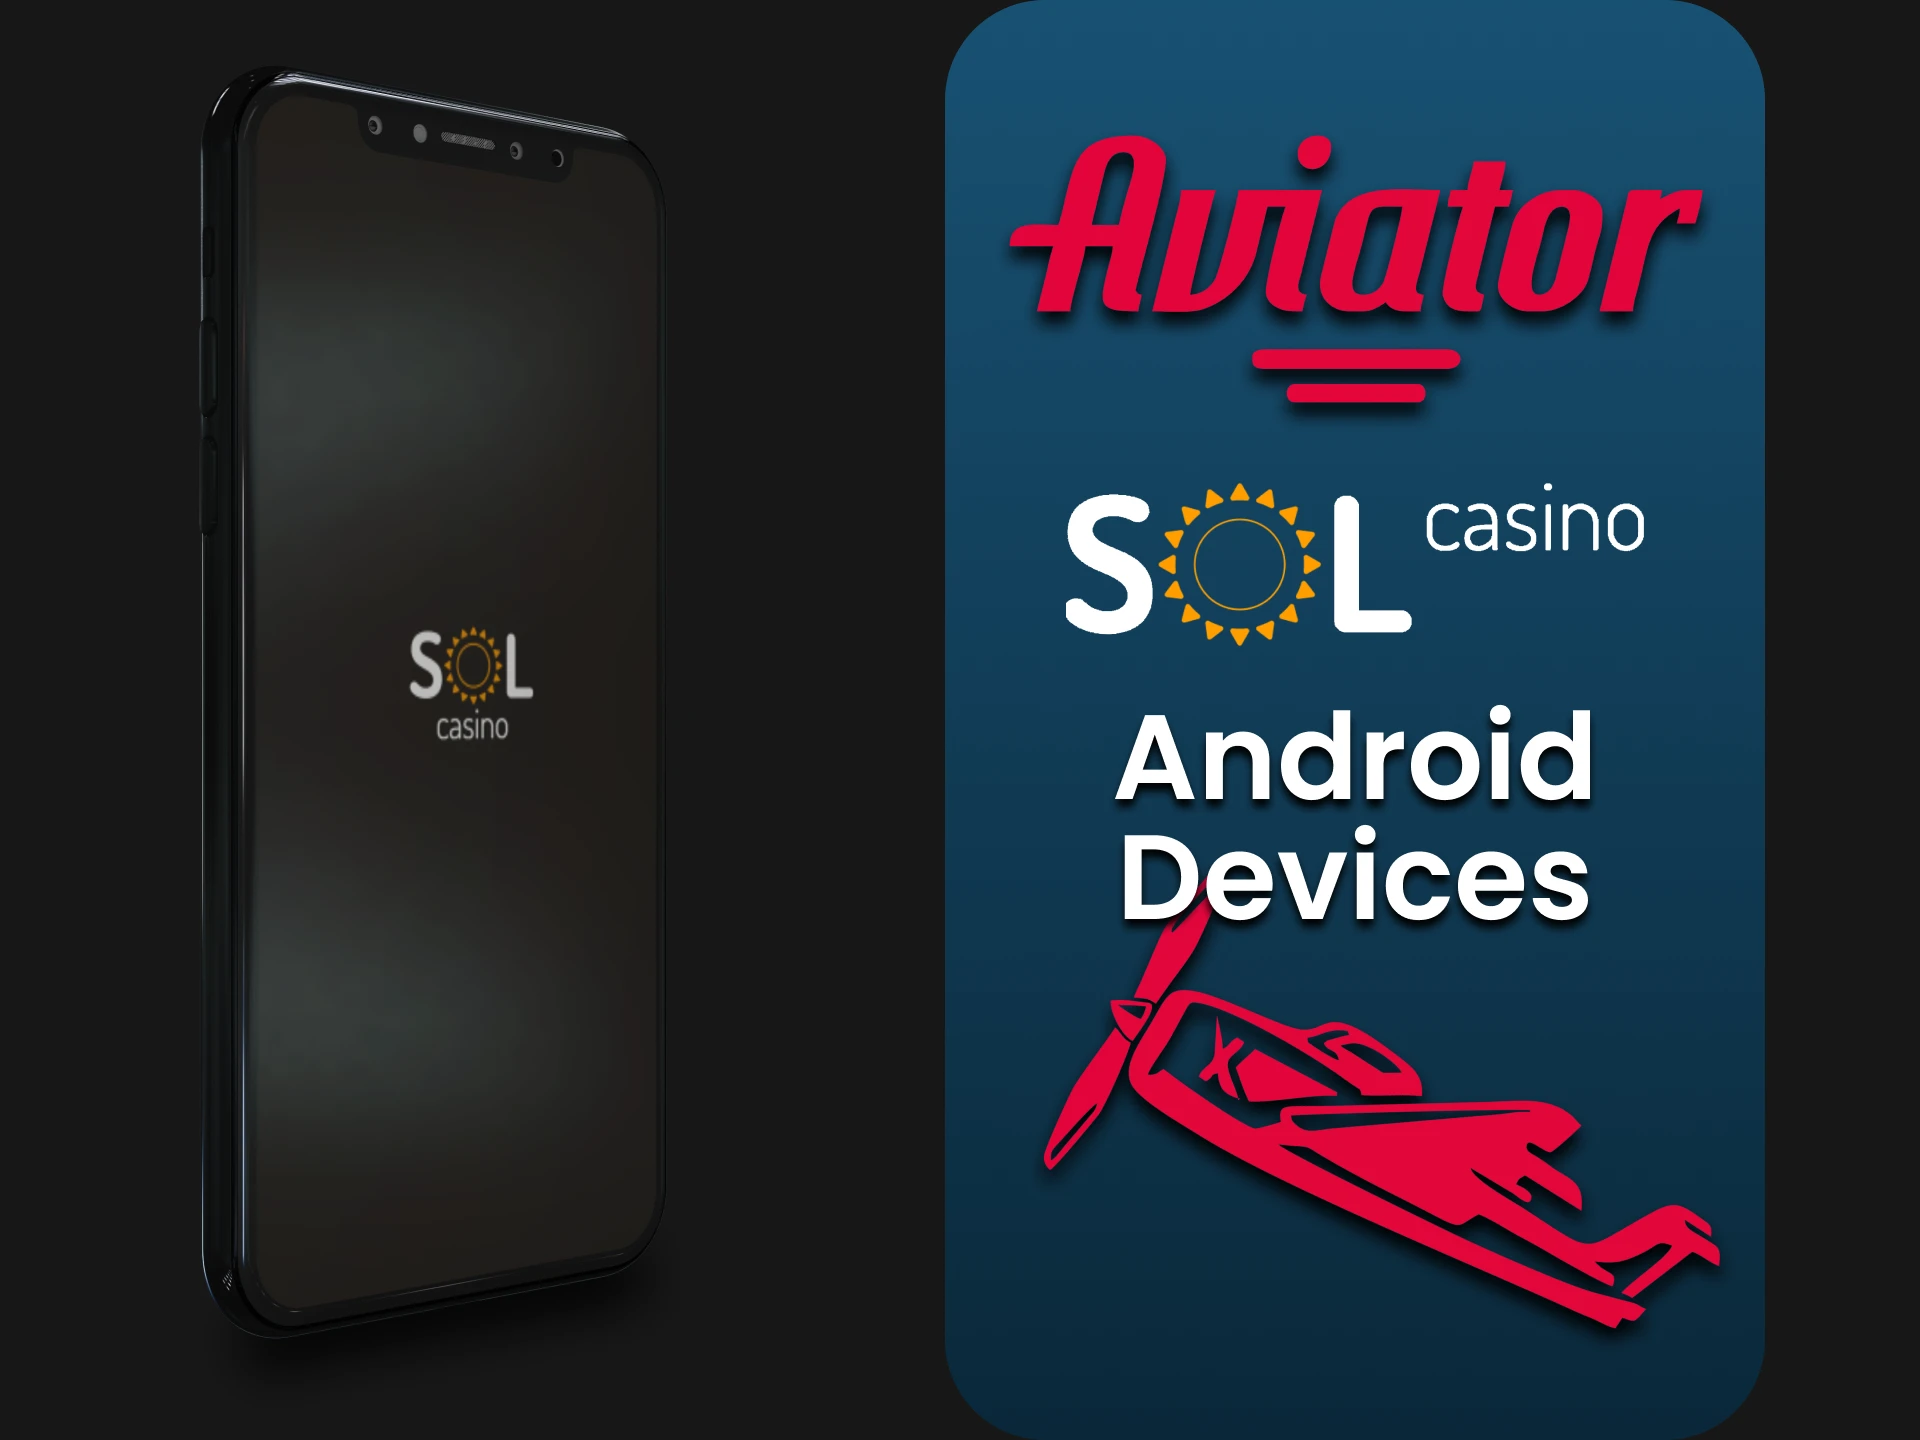 Install the Sol Casino application to play Aviator on Android.